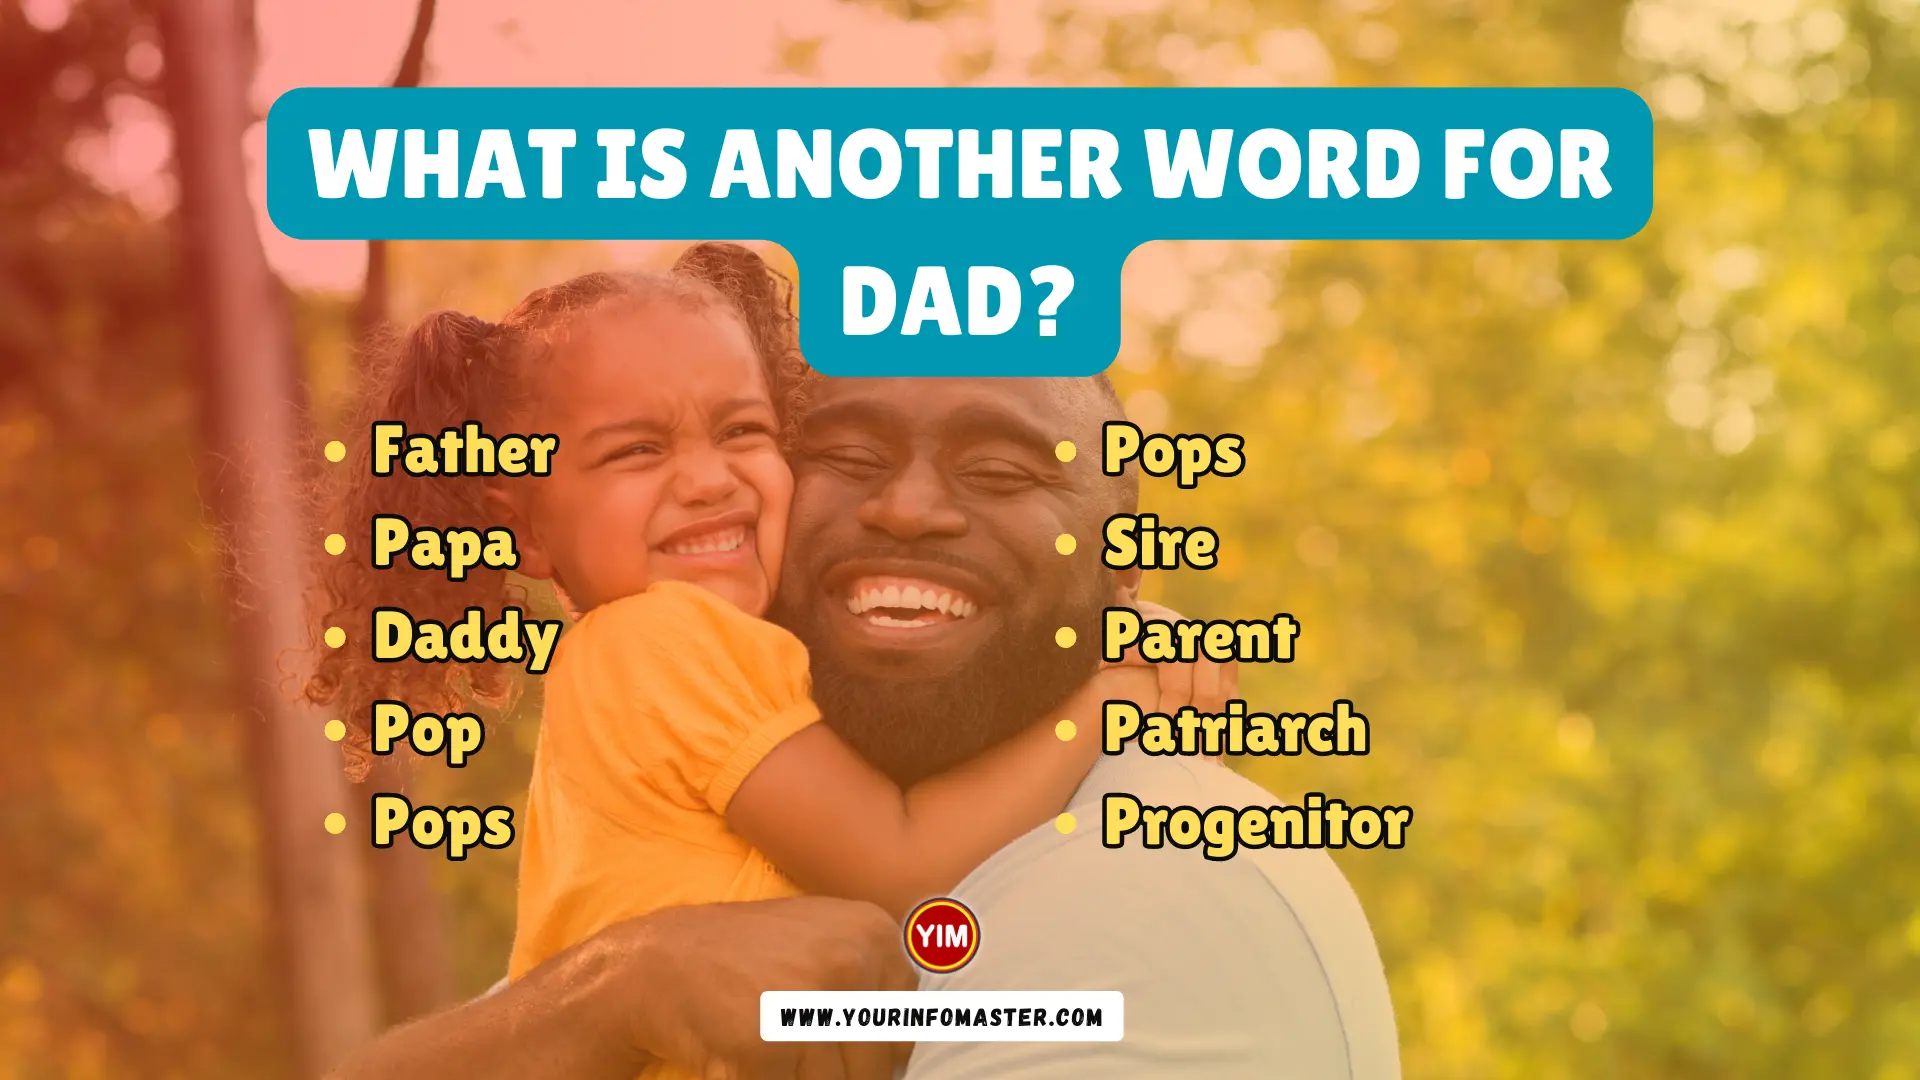 What is another word for Dad